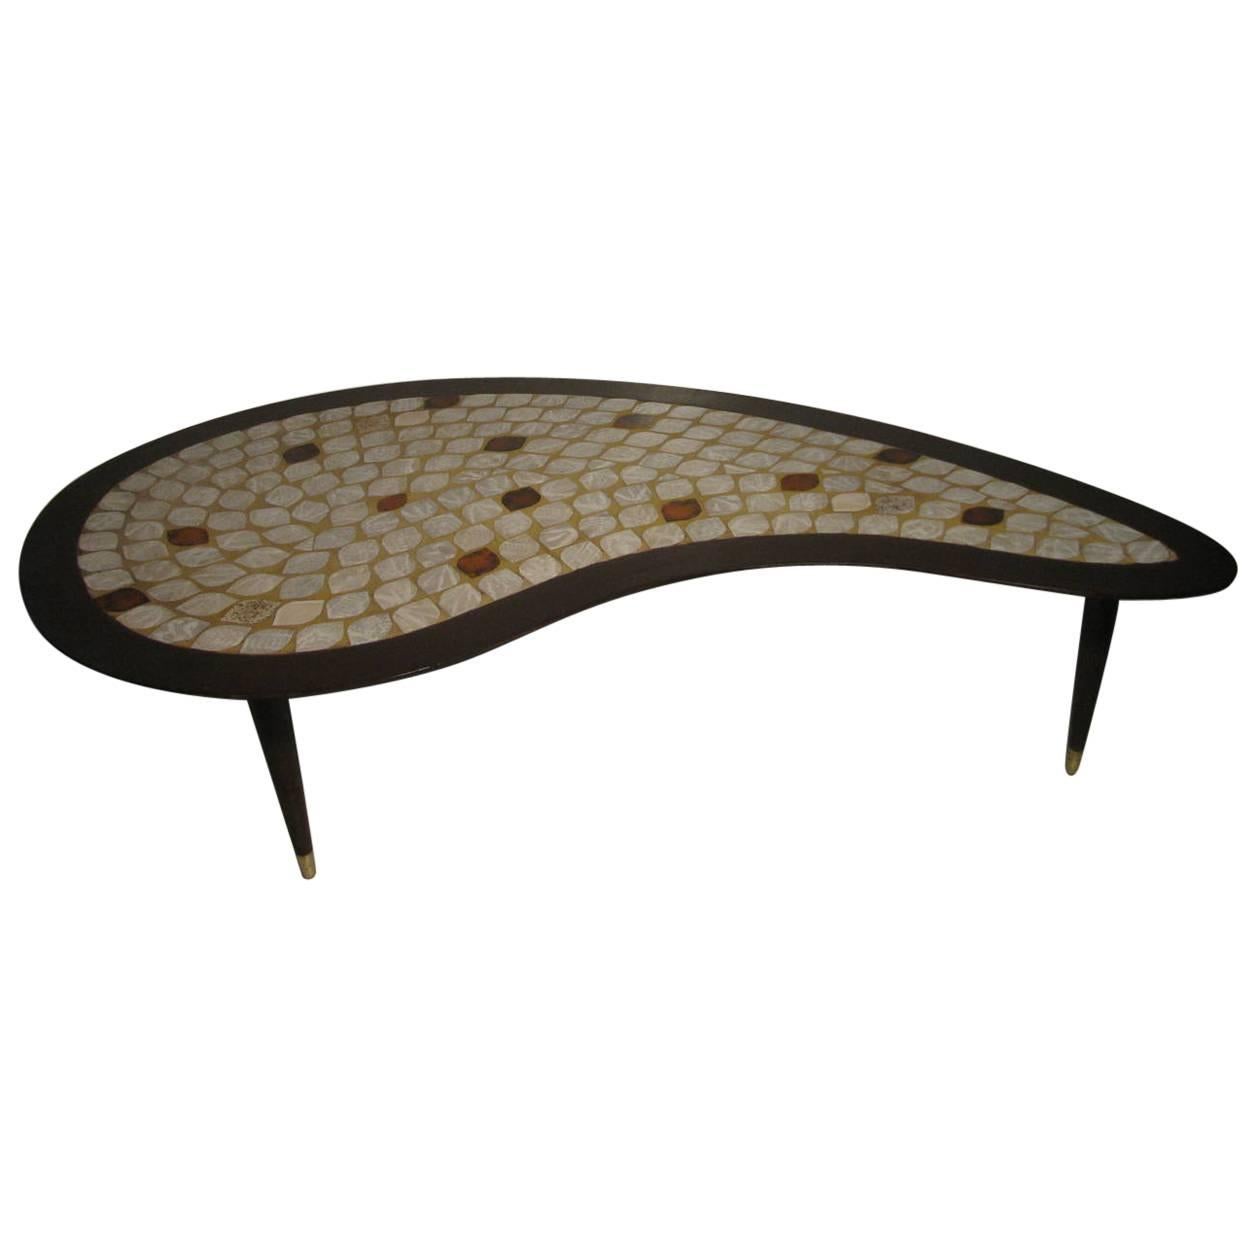 Mid-Century Modern Kidney Shaped Tile Top Cocktail Table by Hohenberg